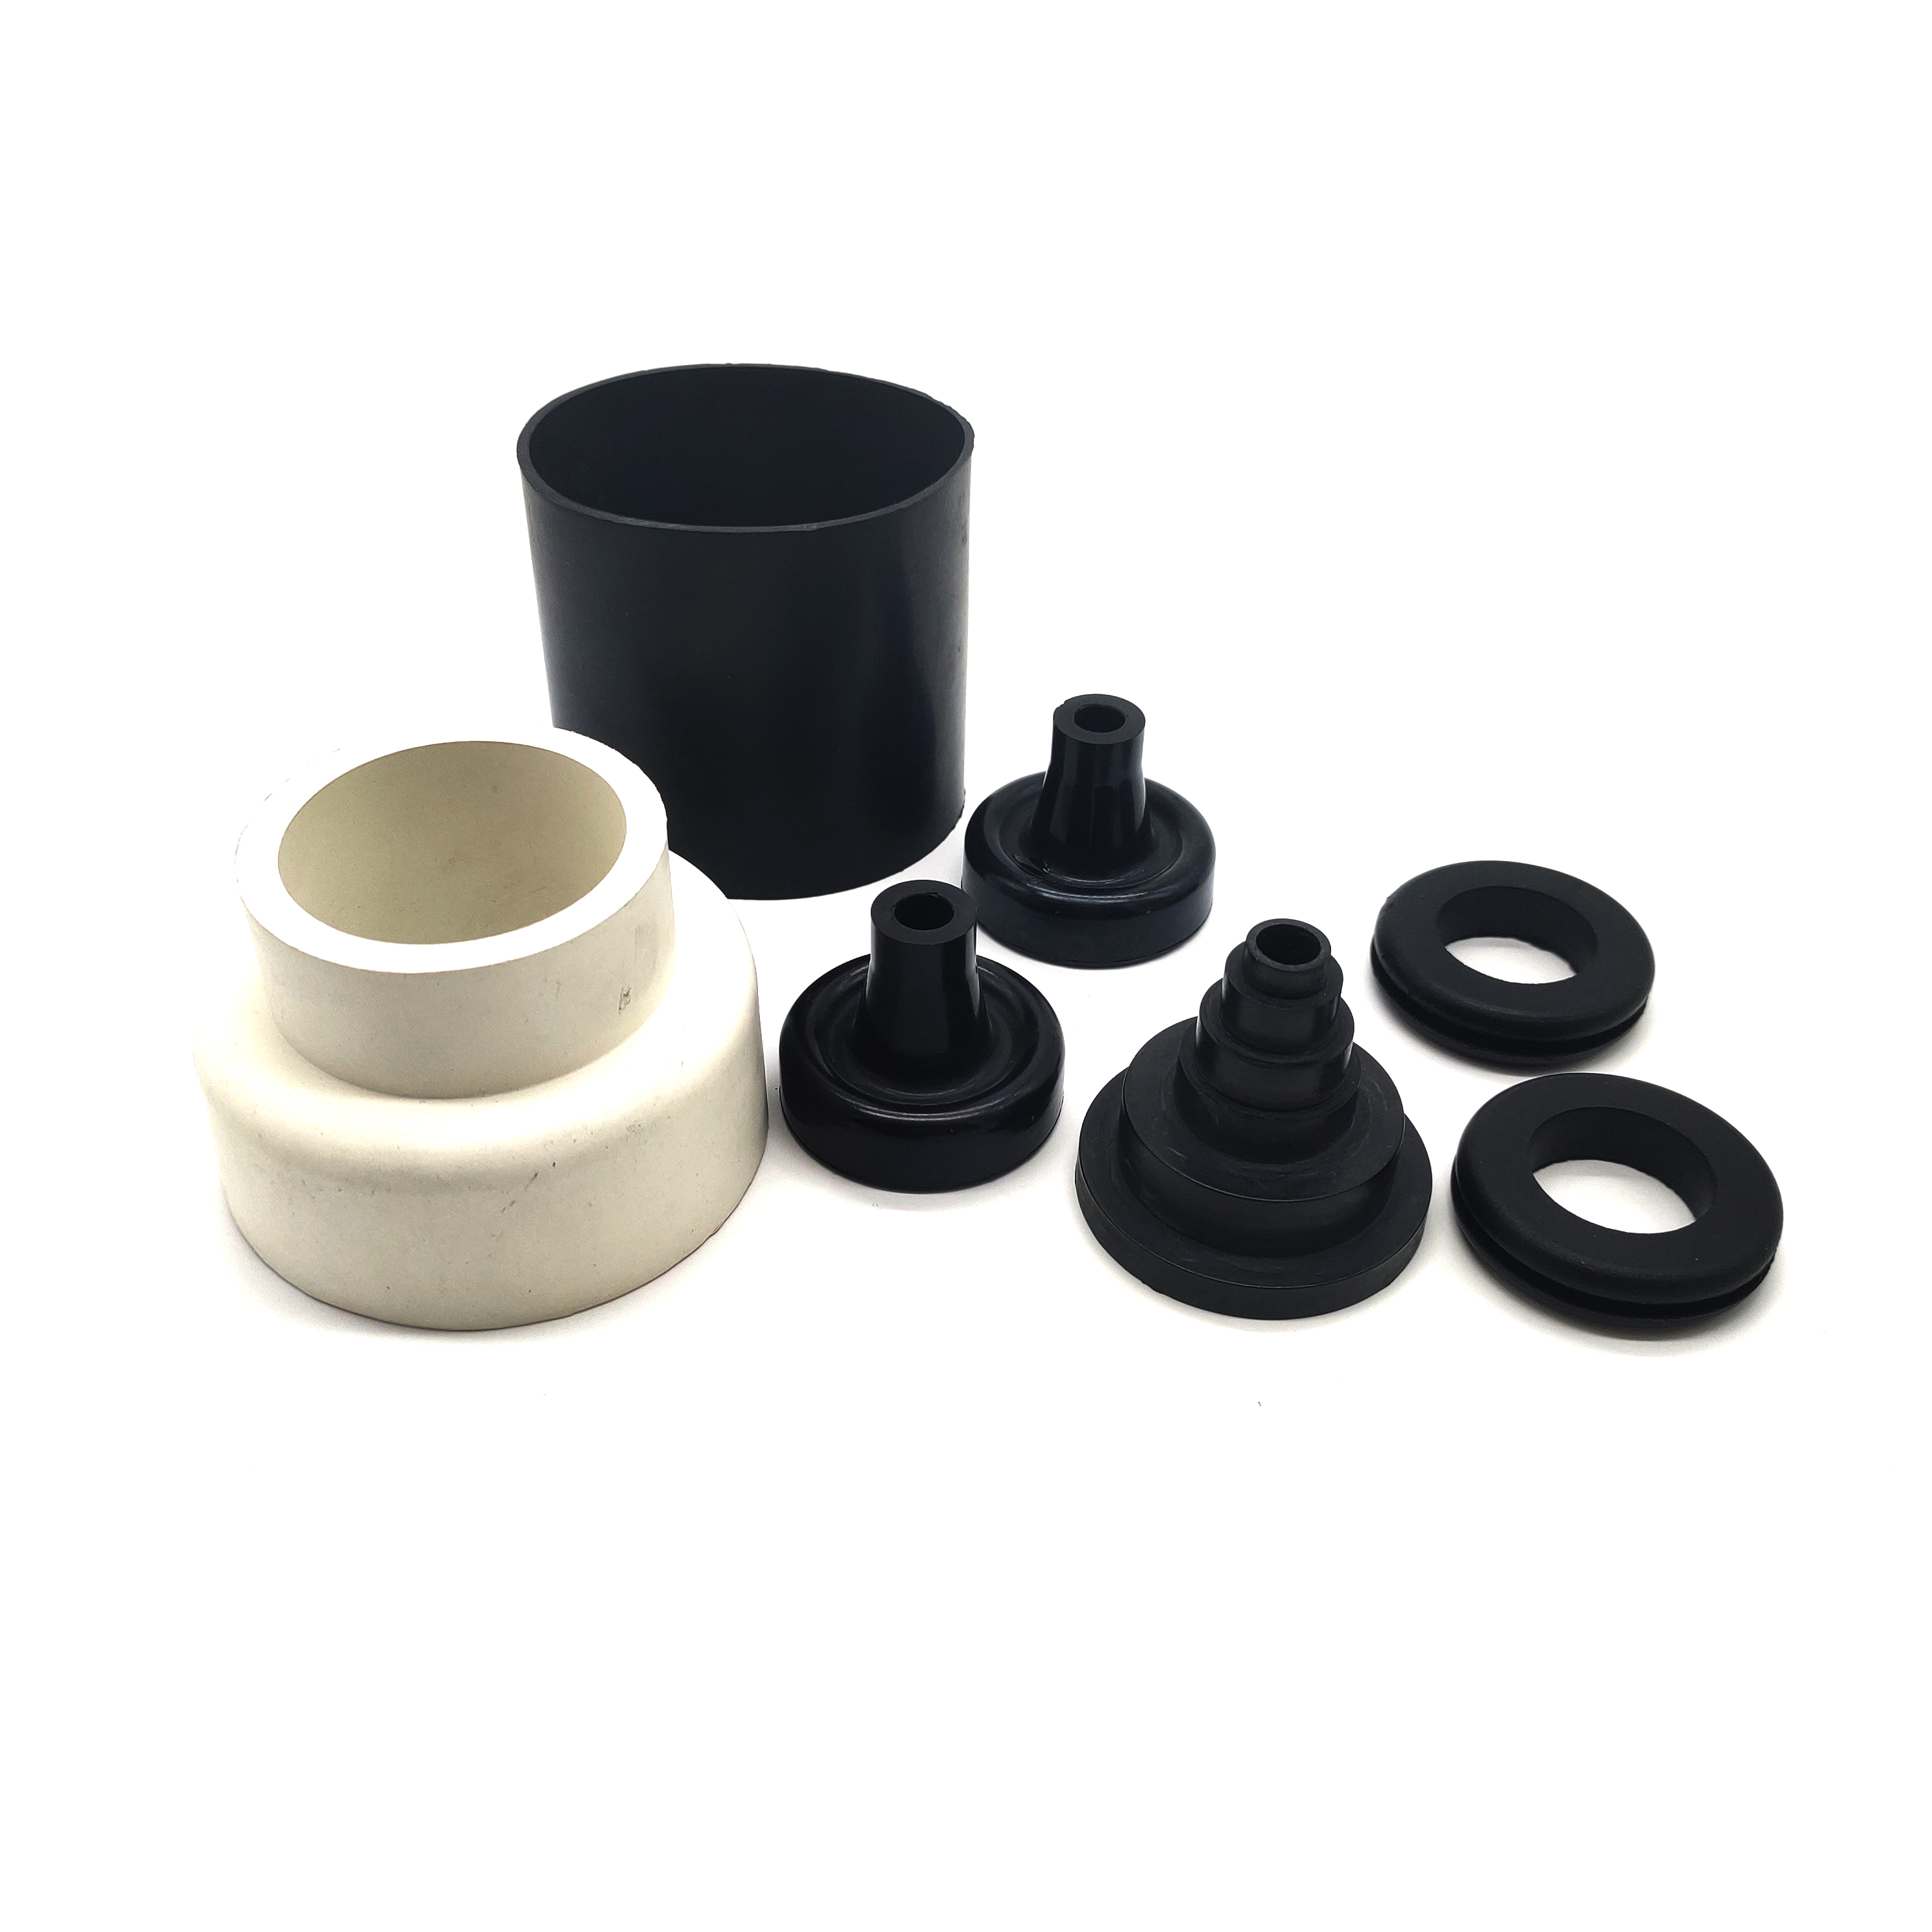 Waterproof Custom Rubber Products and Parts